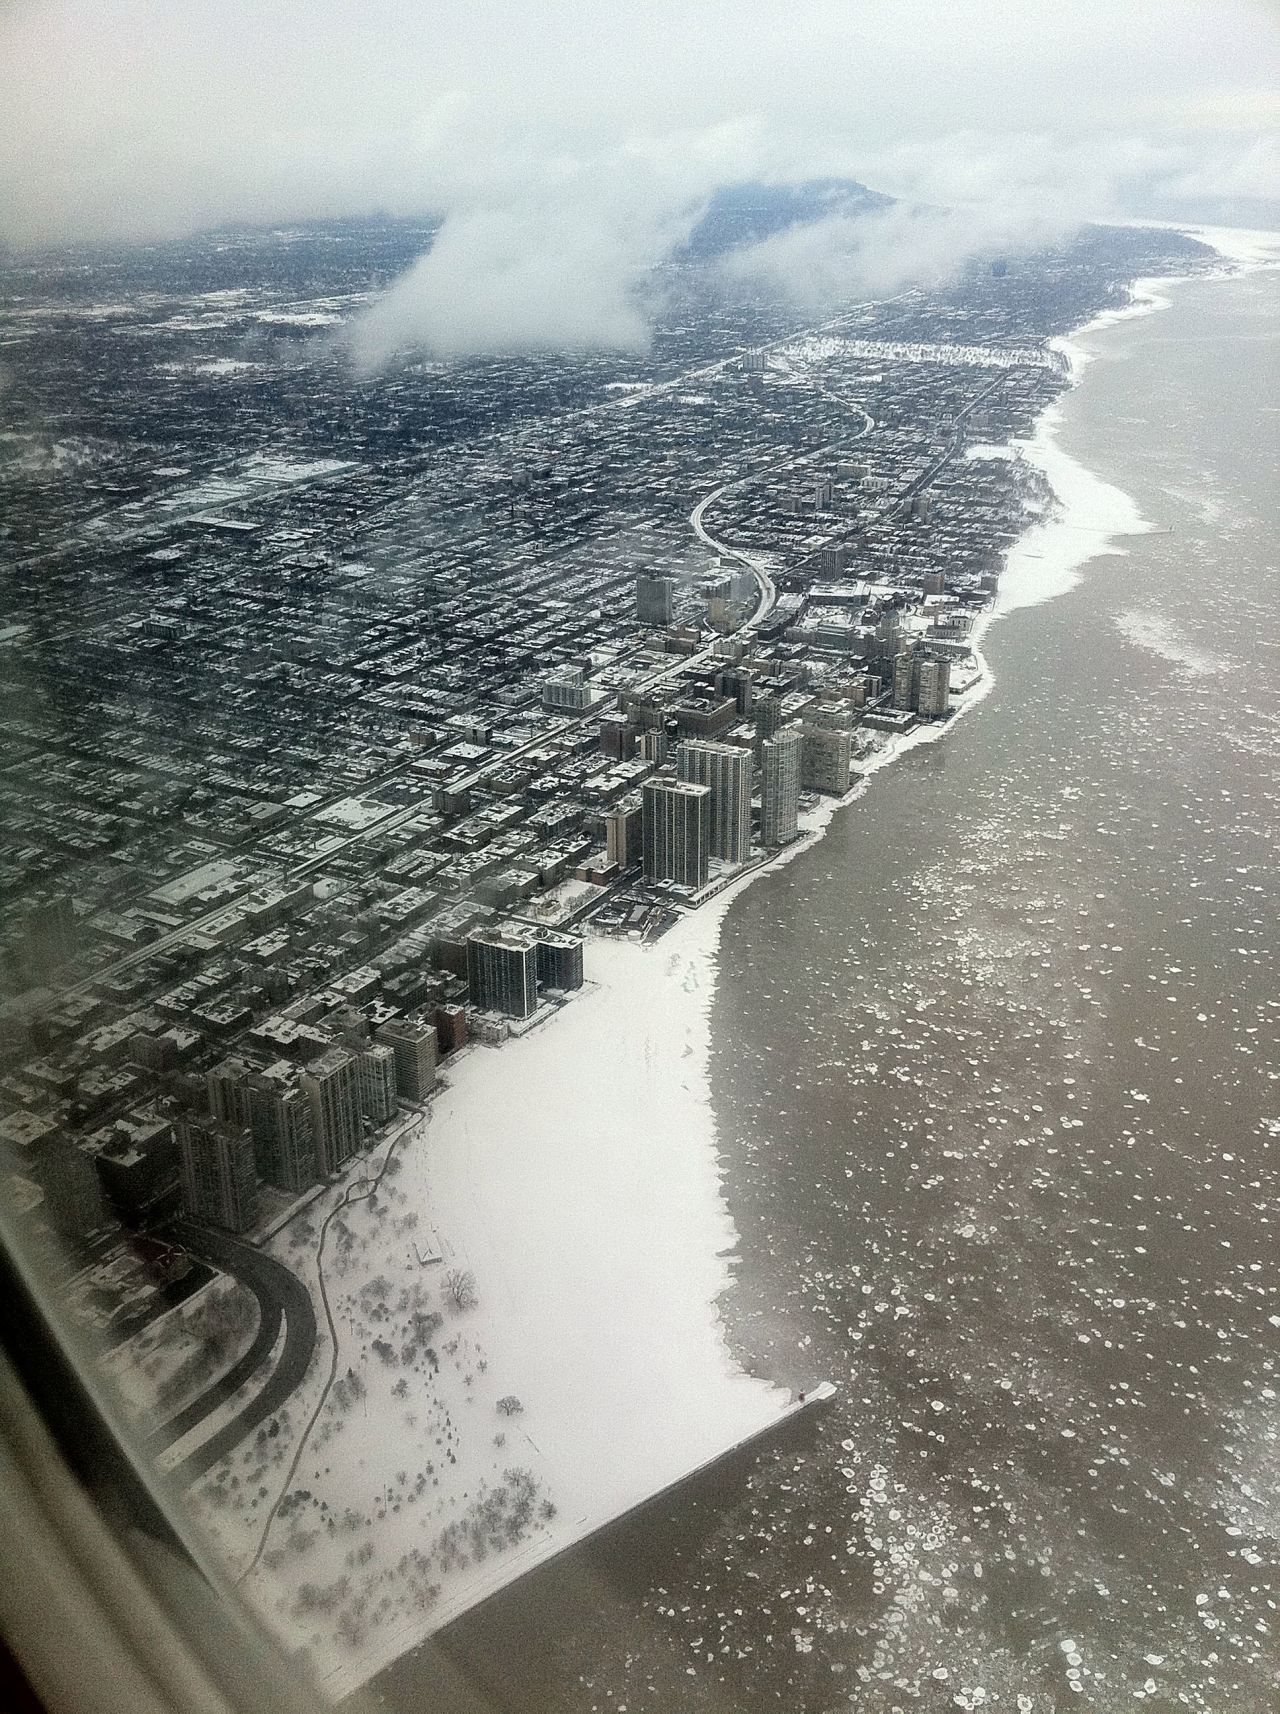 Marvin Mason took this "apocalyptic" shot of Chicago flying over Lake Michigan. "The icy waters added to the drama."